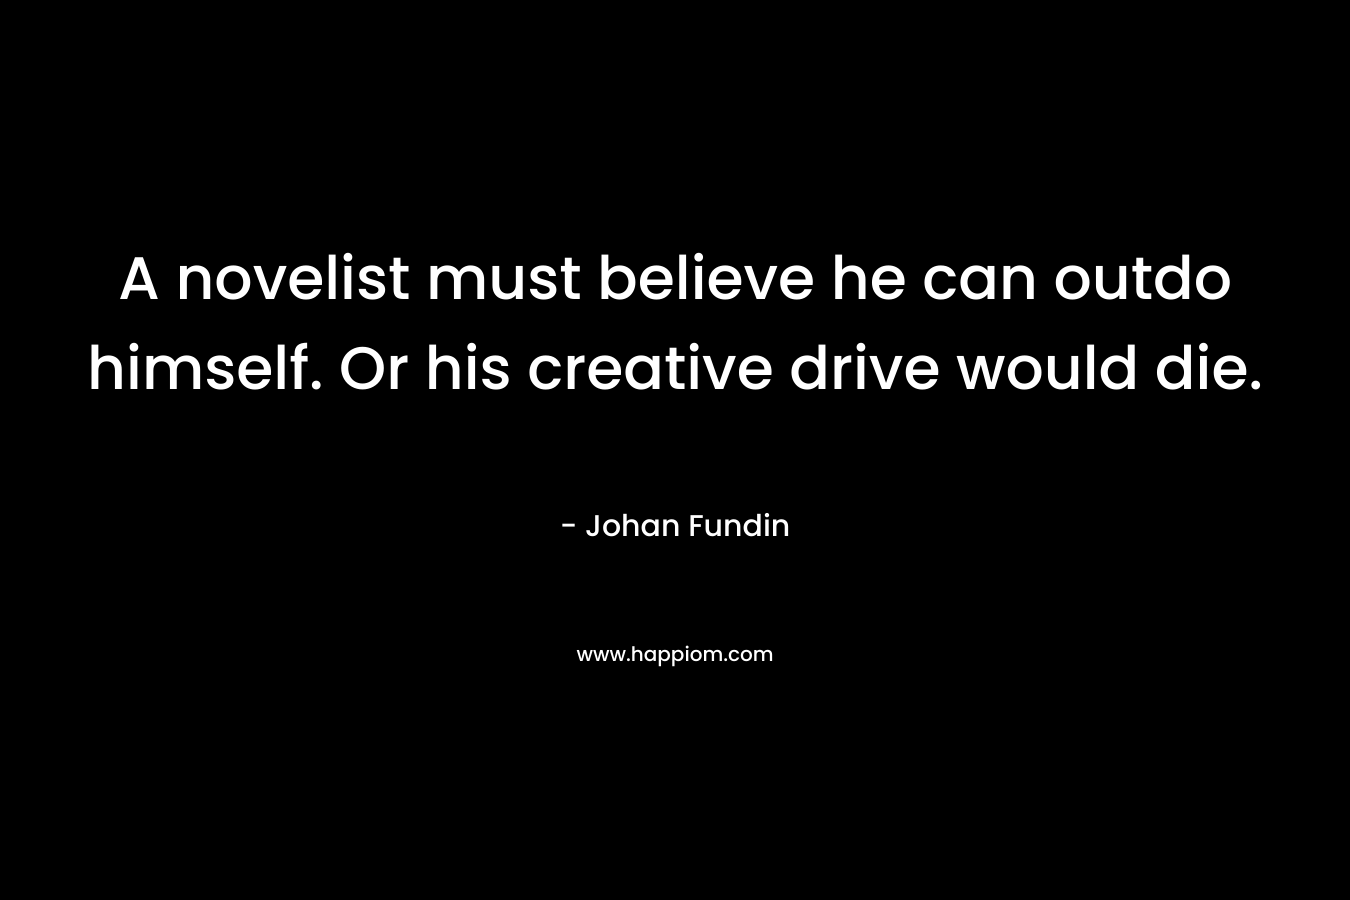 A novelist must believe he can outdo himself. Or his creative drive would die.